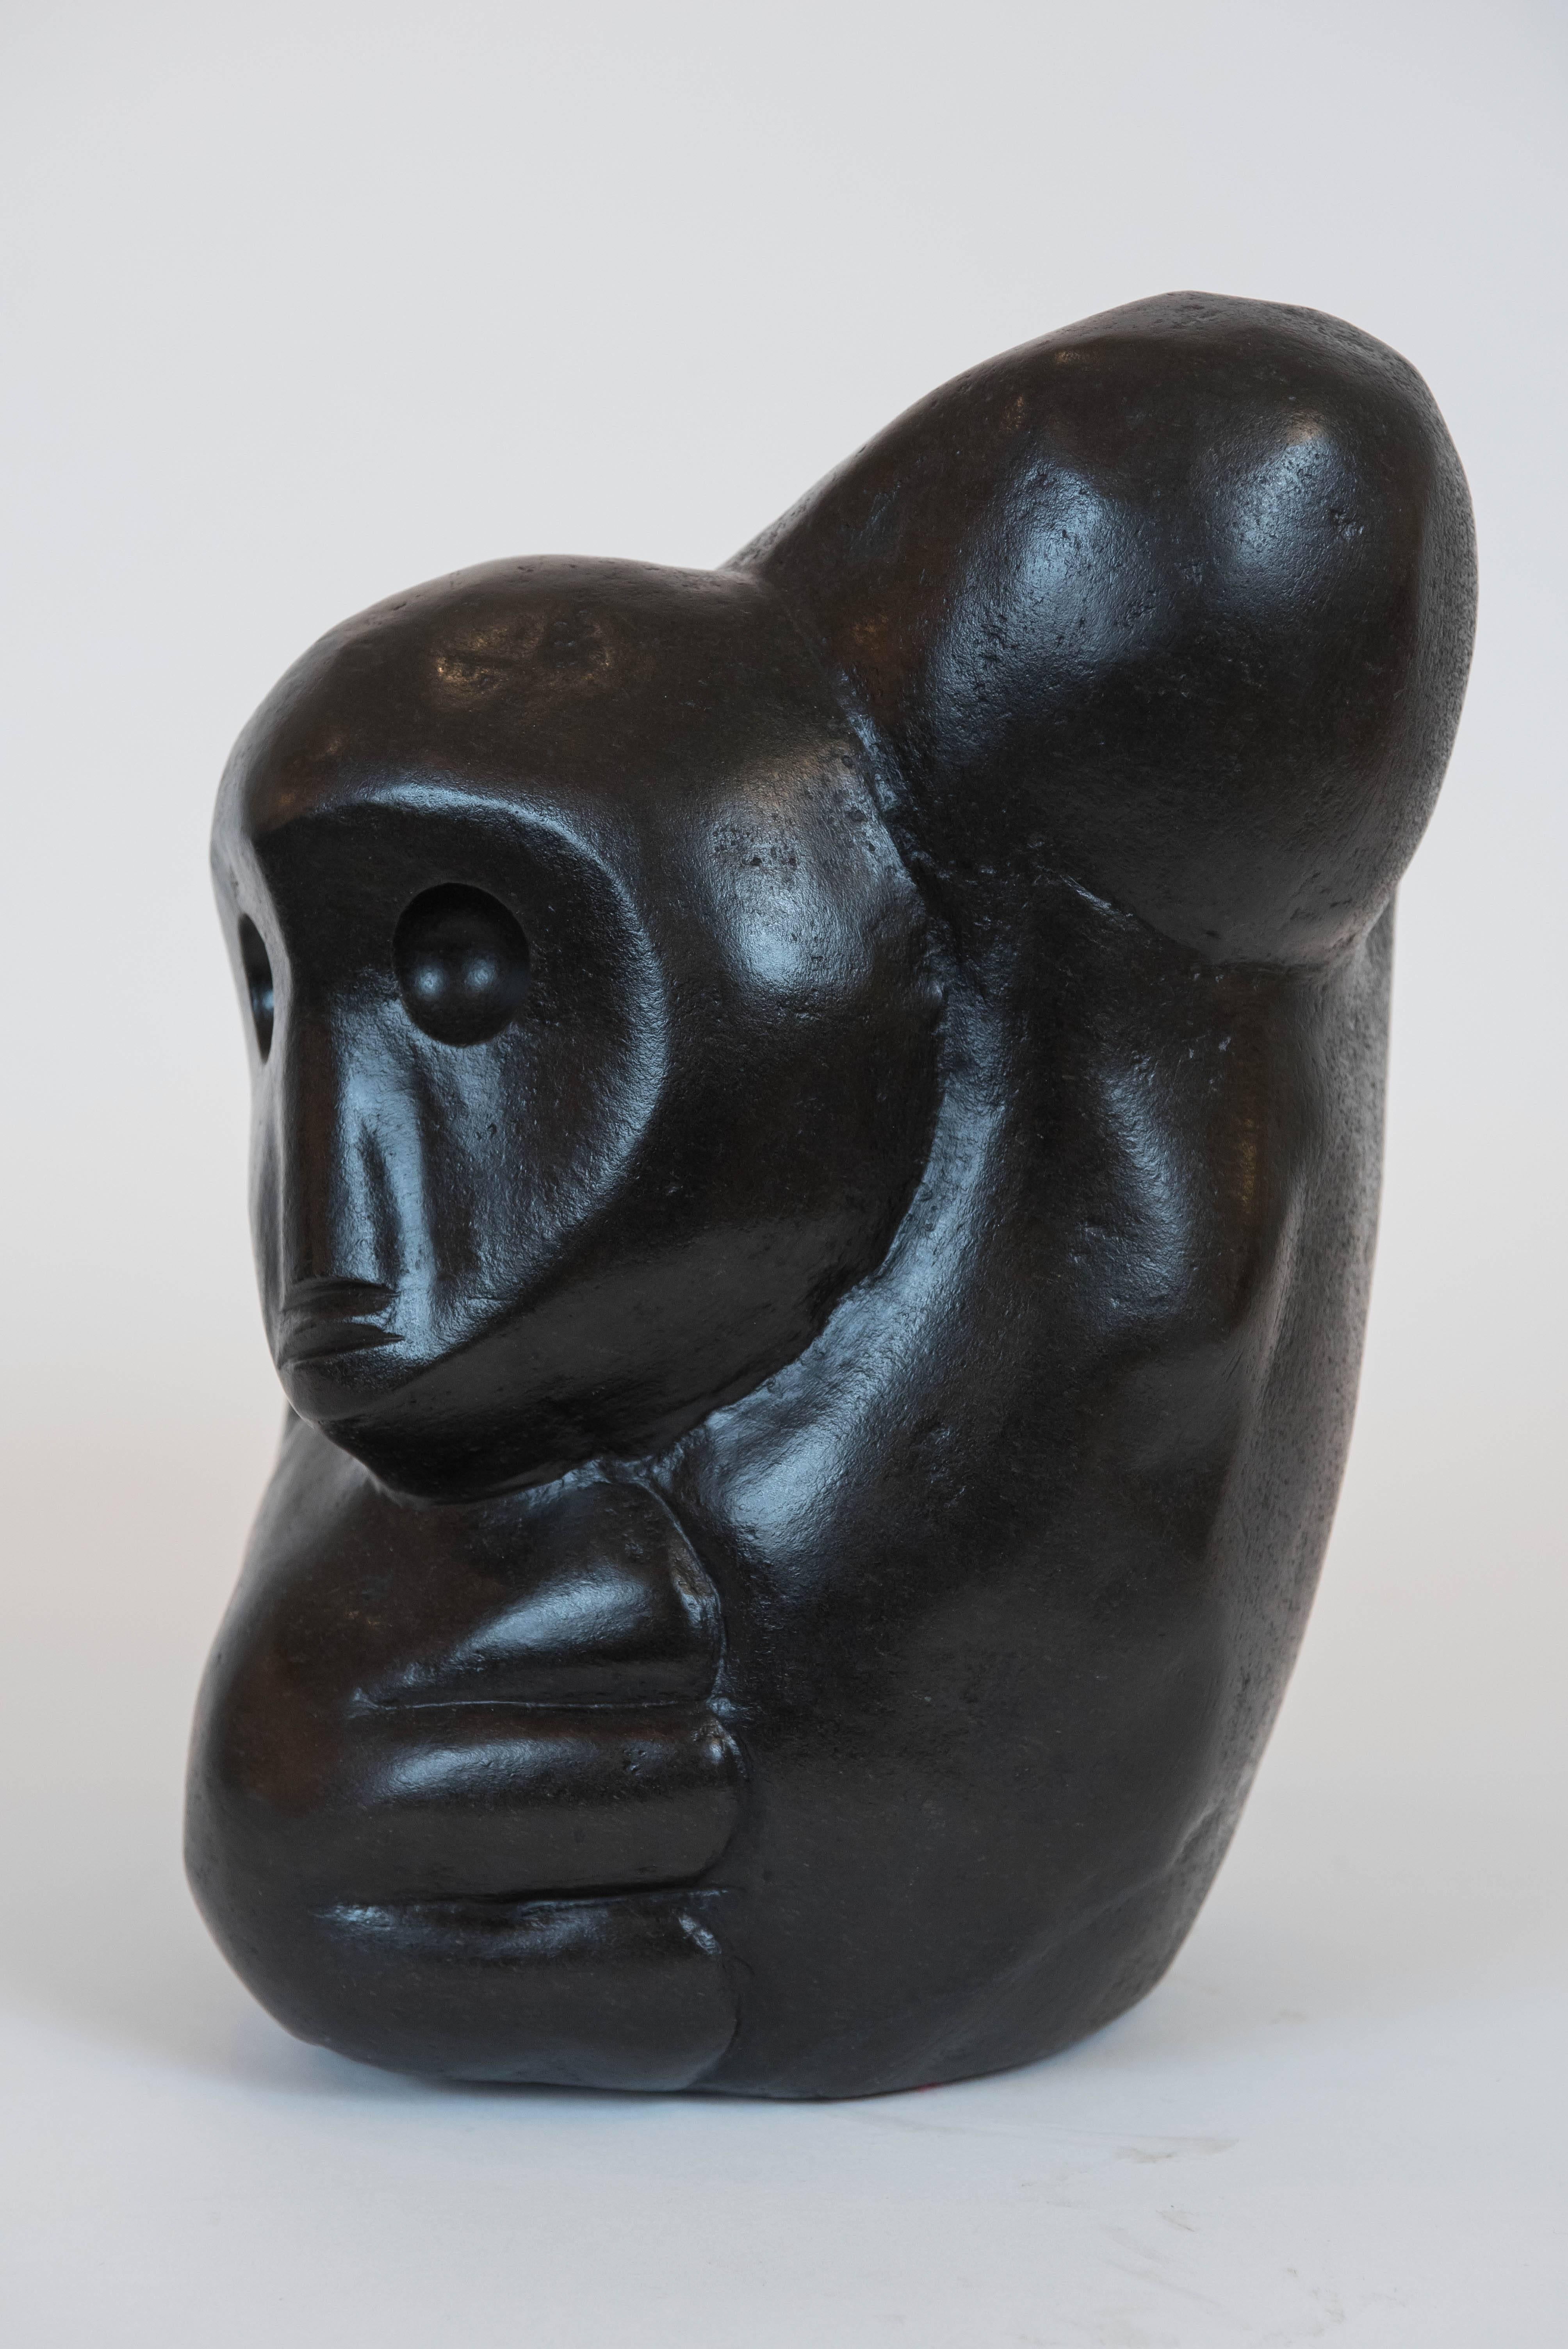 This powerful and poignant sculpture is by master carver Richard Mteki,
whose work has been recognized and collected around the world. It is made of
of black serpentine, a gem-quality magnesium silicate and is signed R. Mteki. It
was originally